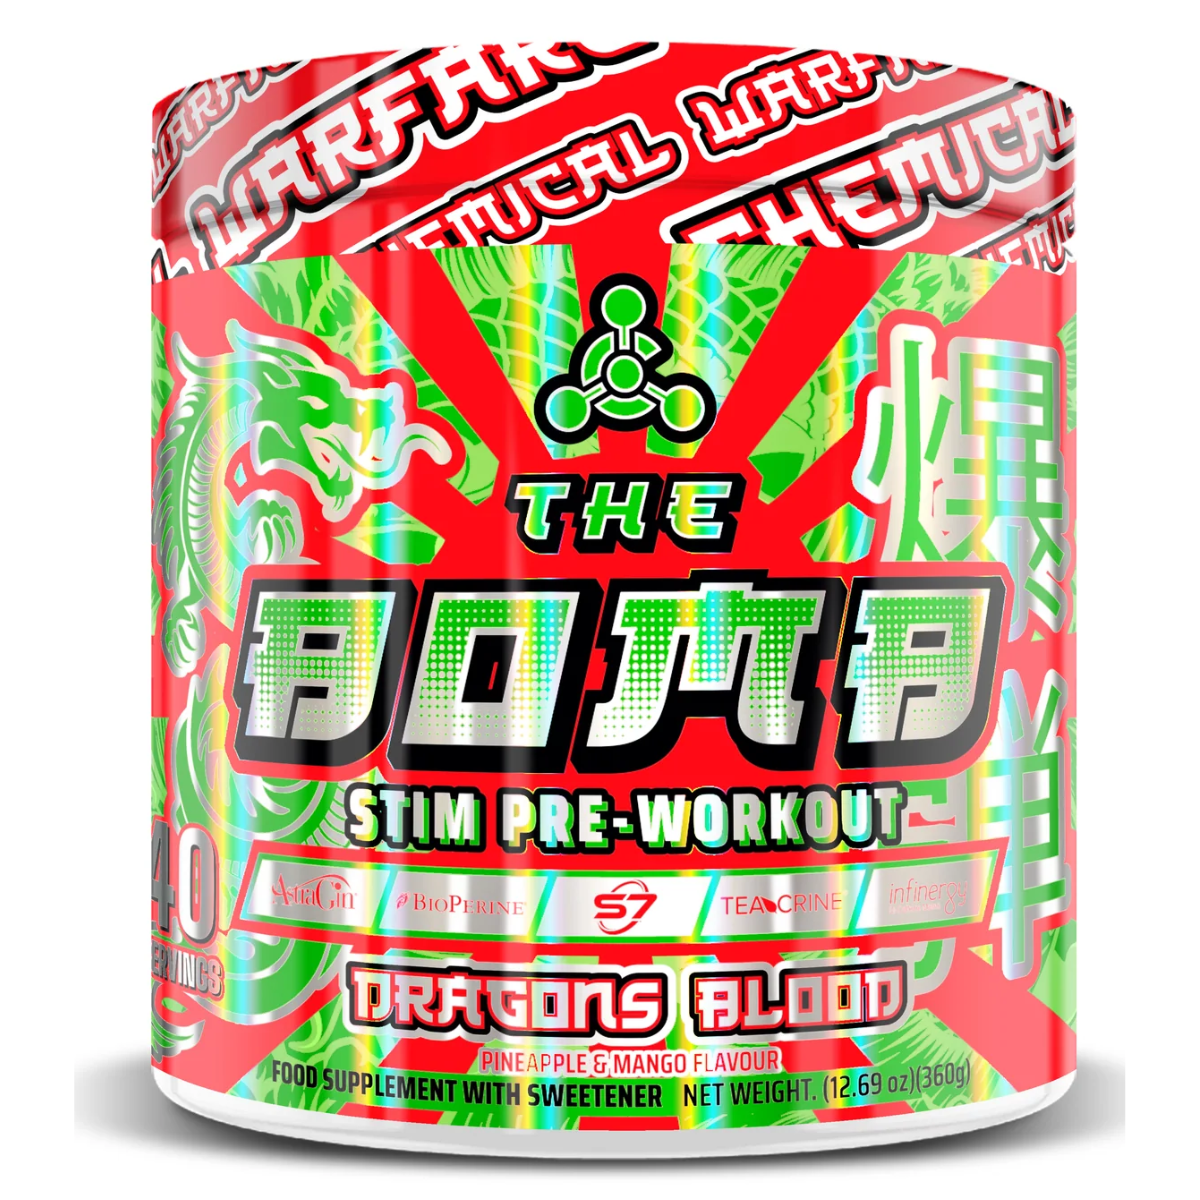 CW THE BOMB™ PRE-WORKOUT